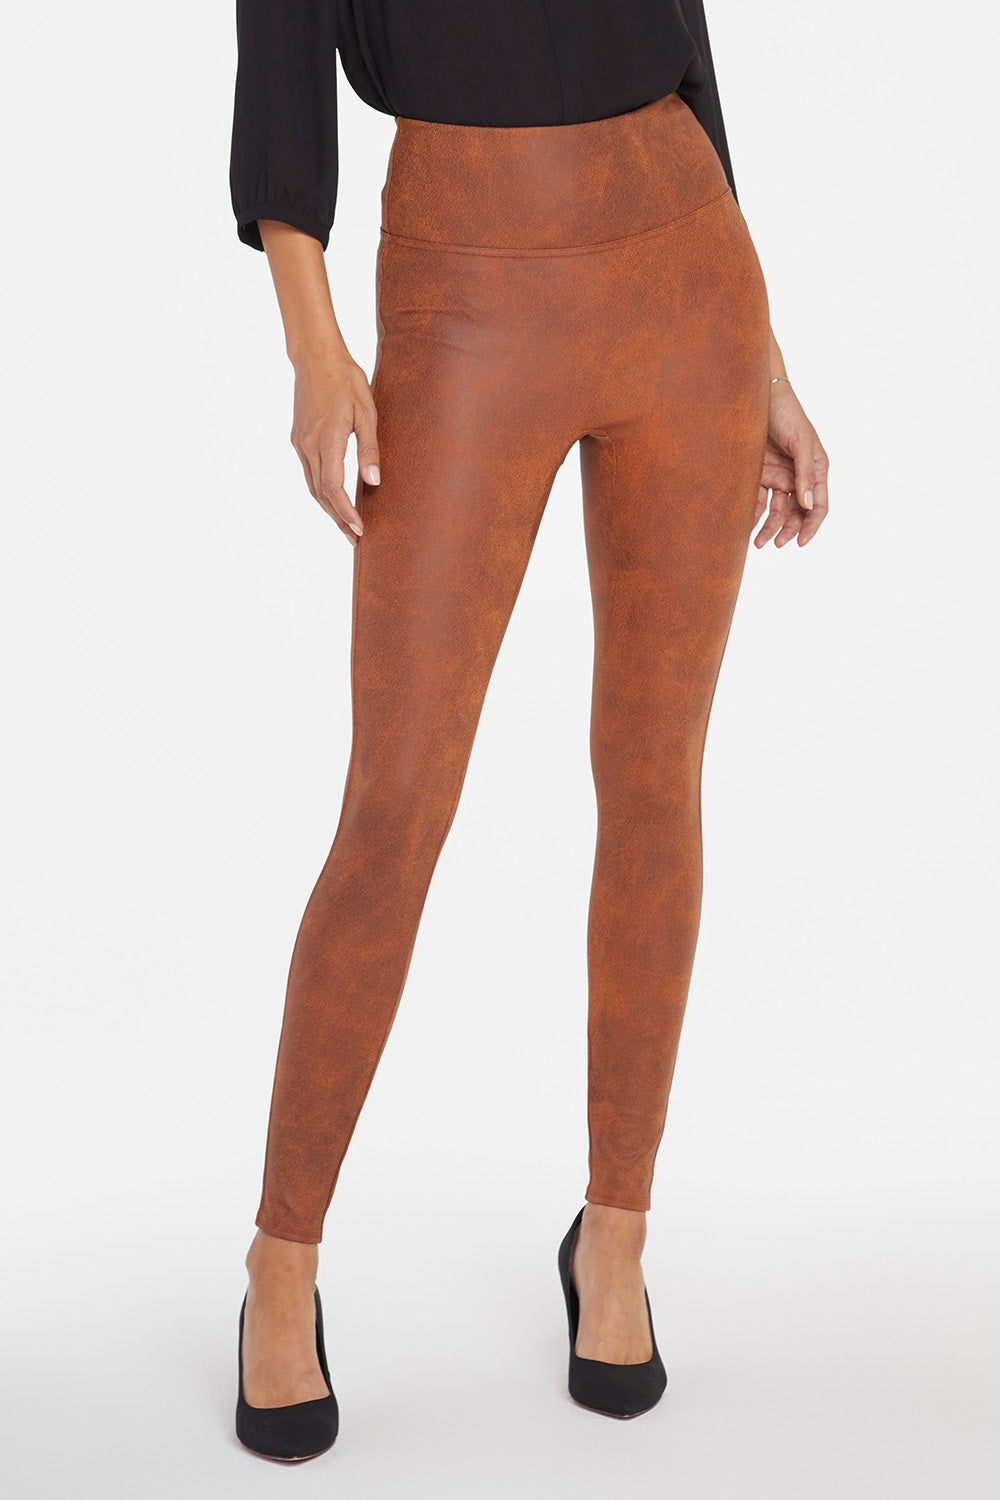 Pull-On Skinny Legging Pants Sculpt-Her™ Collection - Walnut